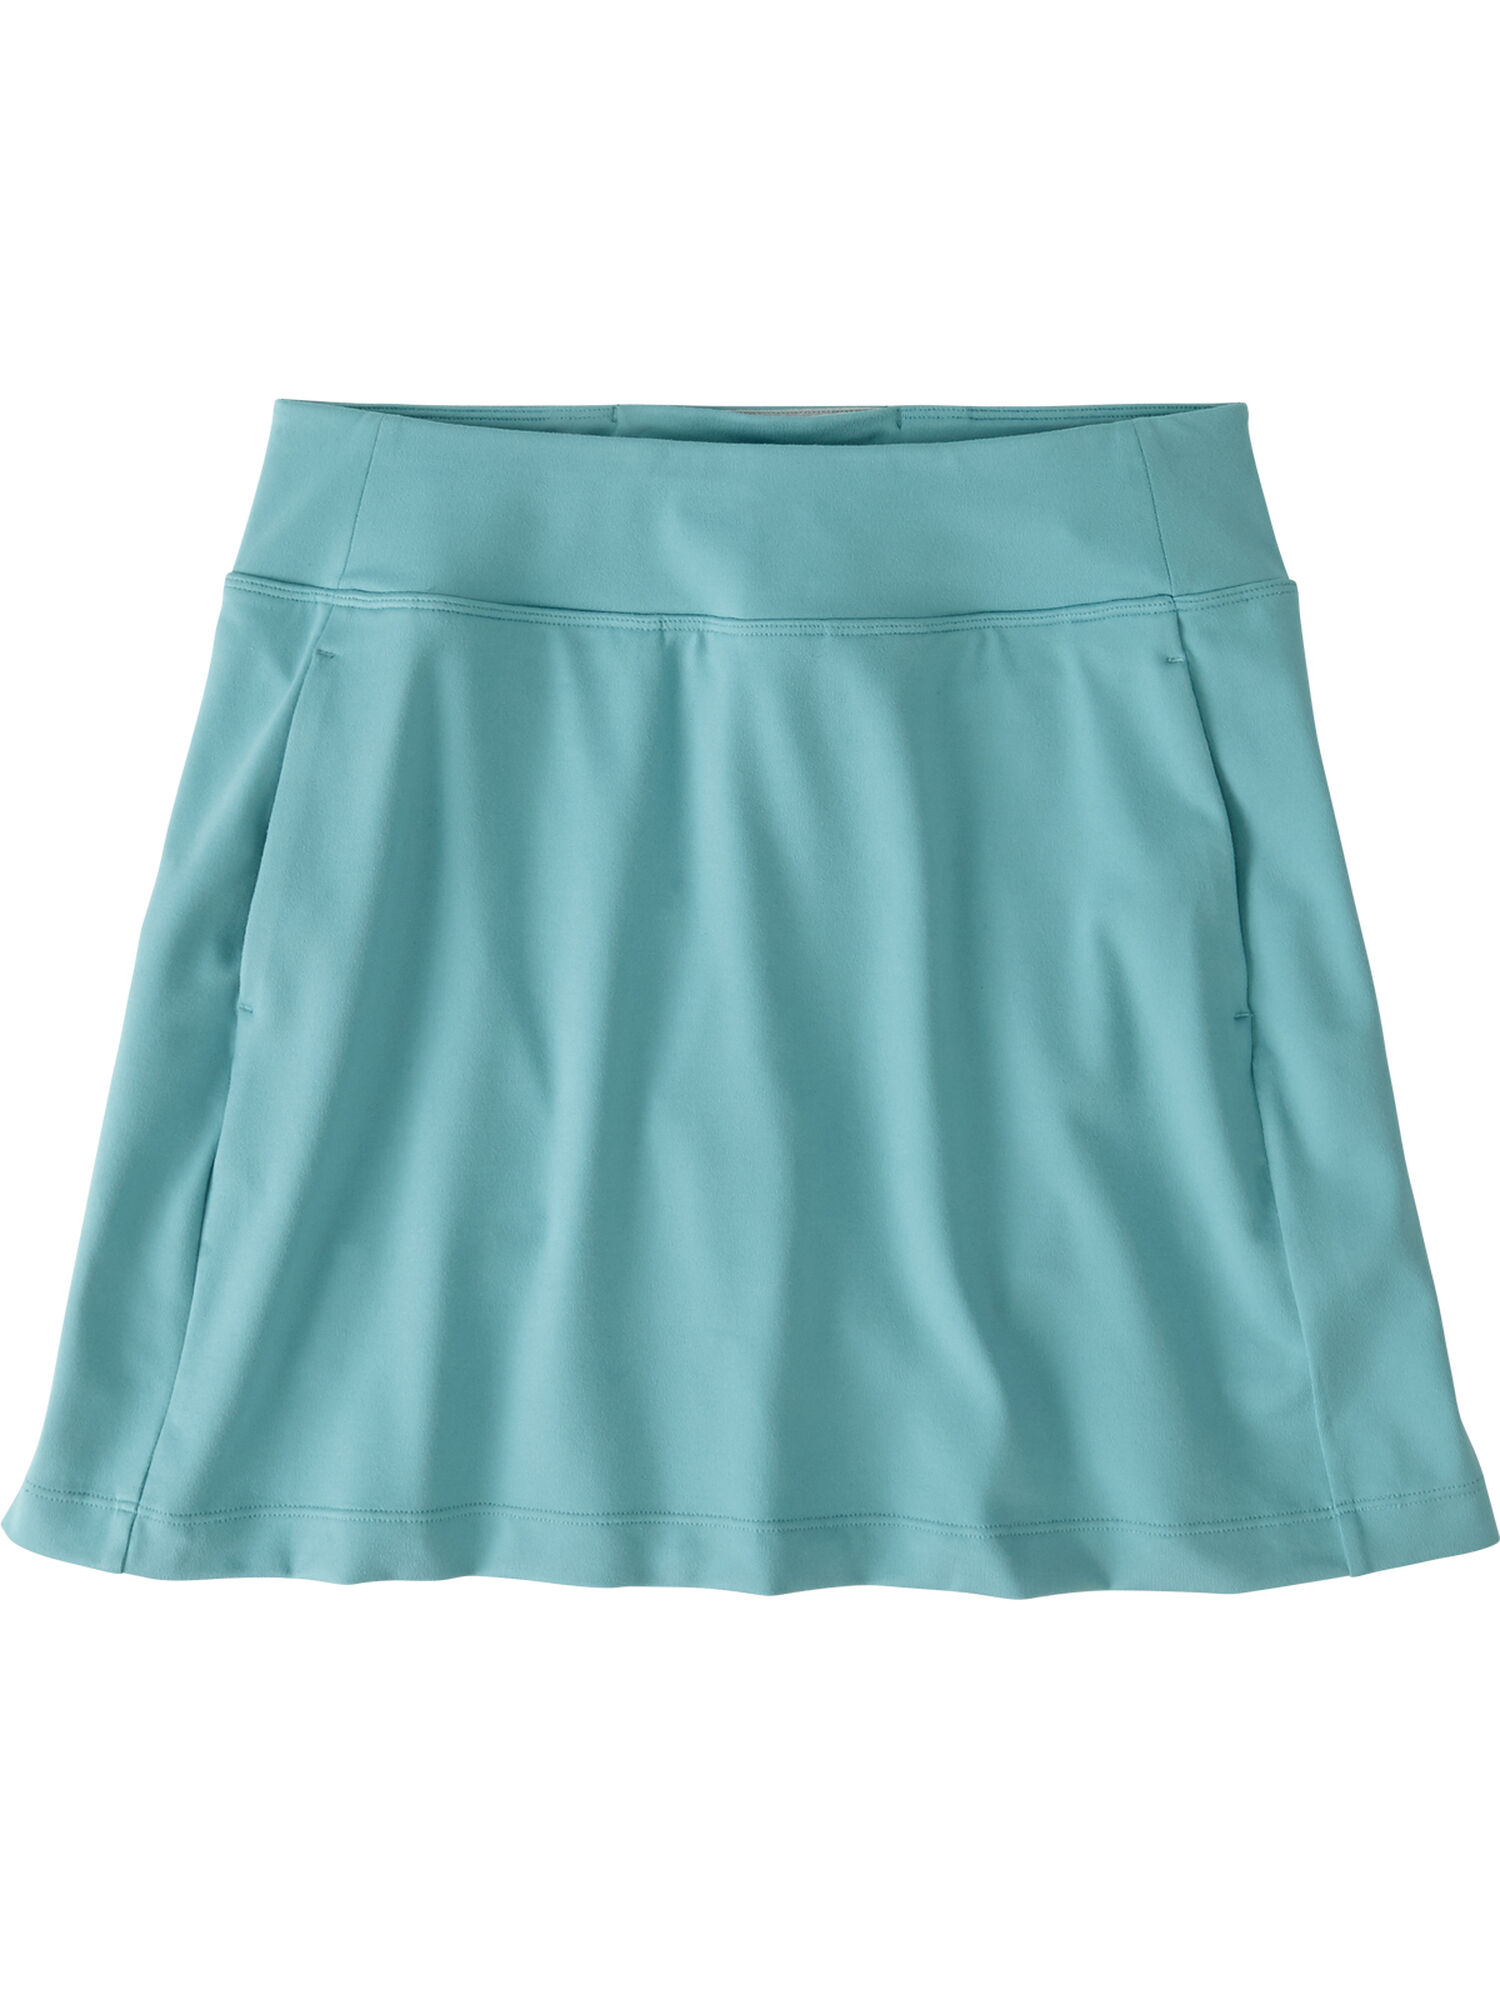 Skort with Pockets: Dream Swing Solid